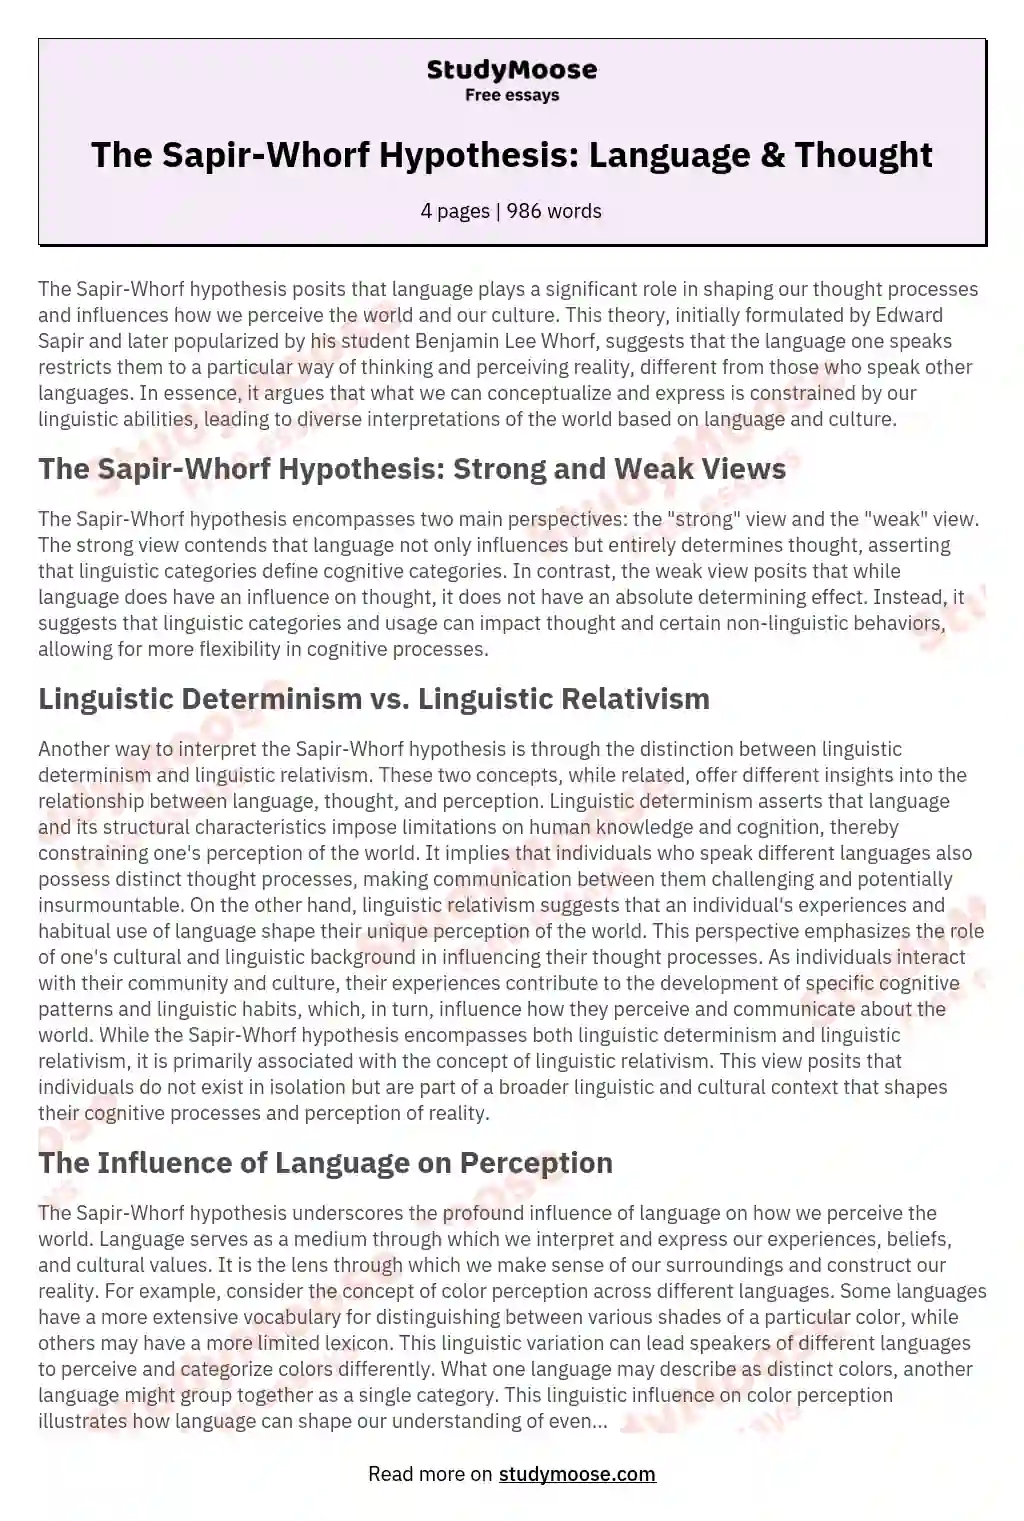 The Sapir-Whorf Hypothesis:  Language & Thought essay